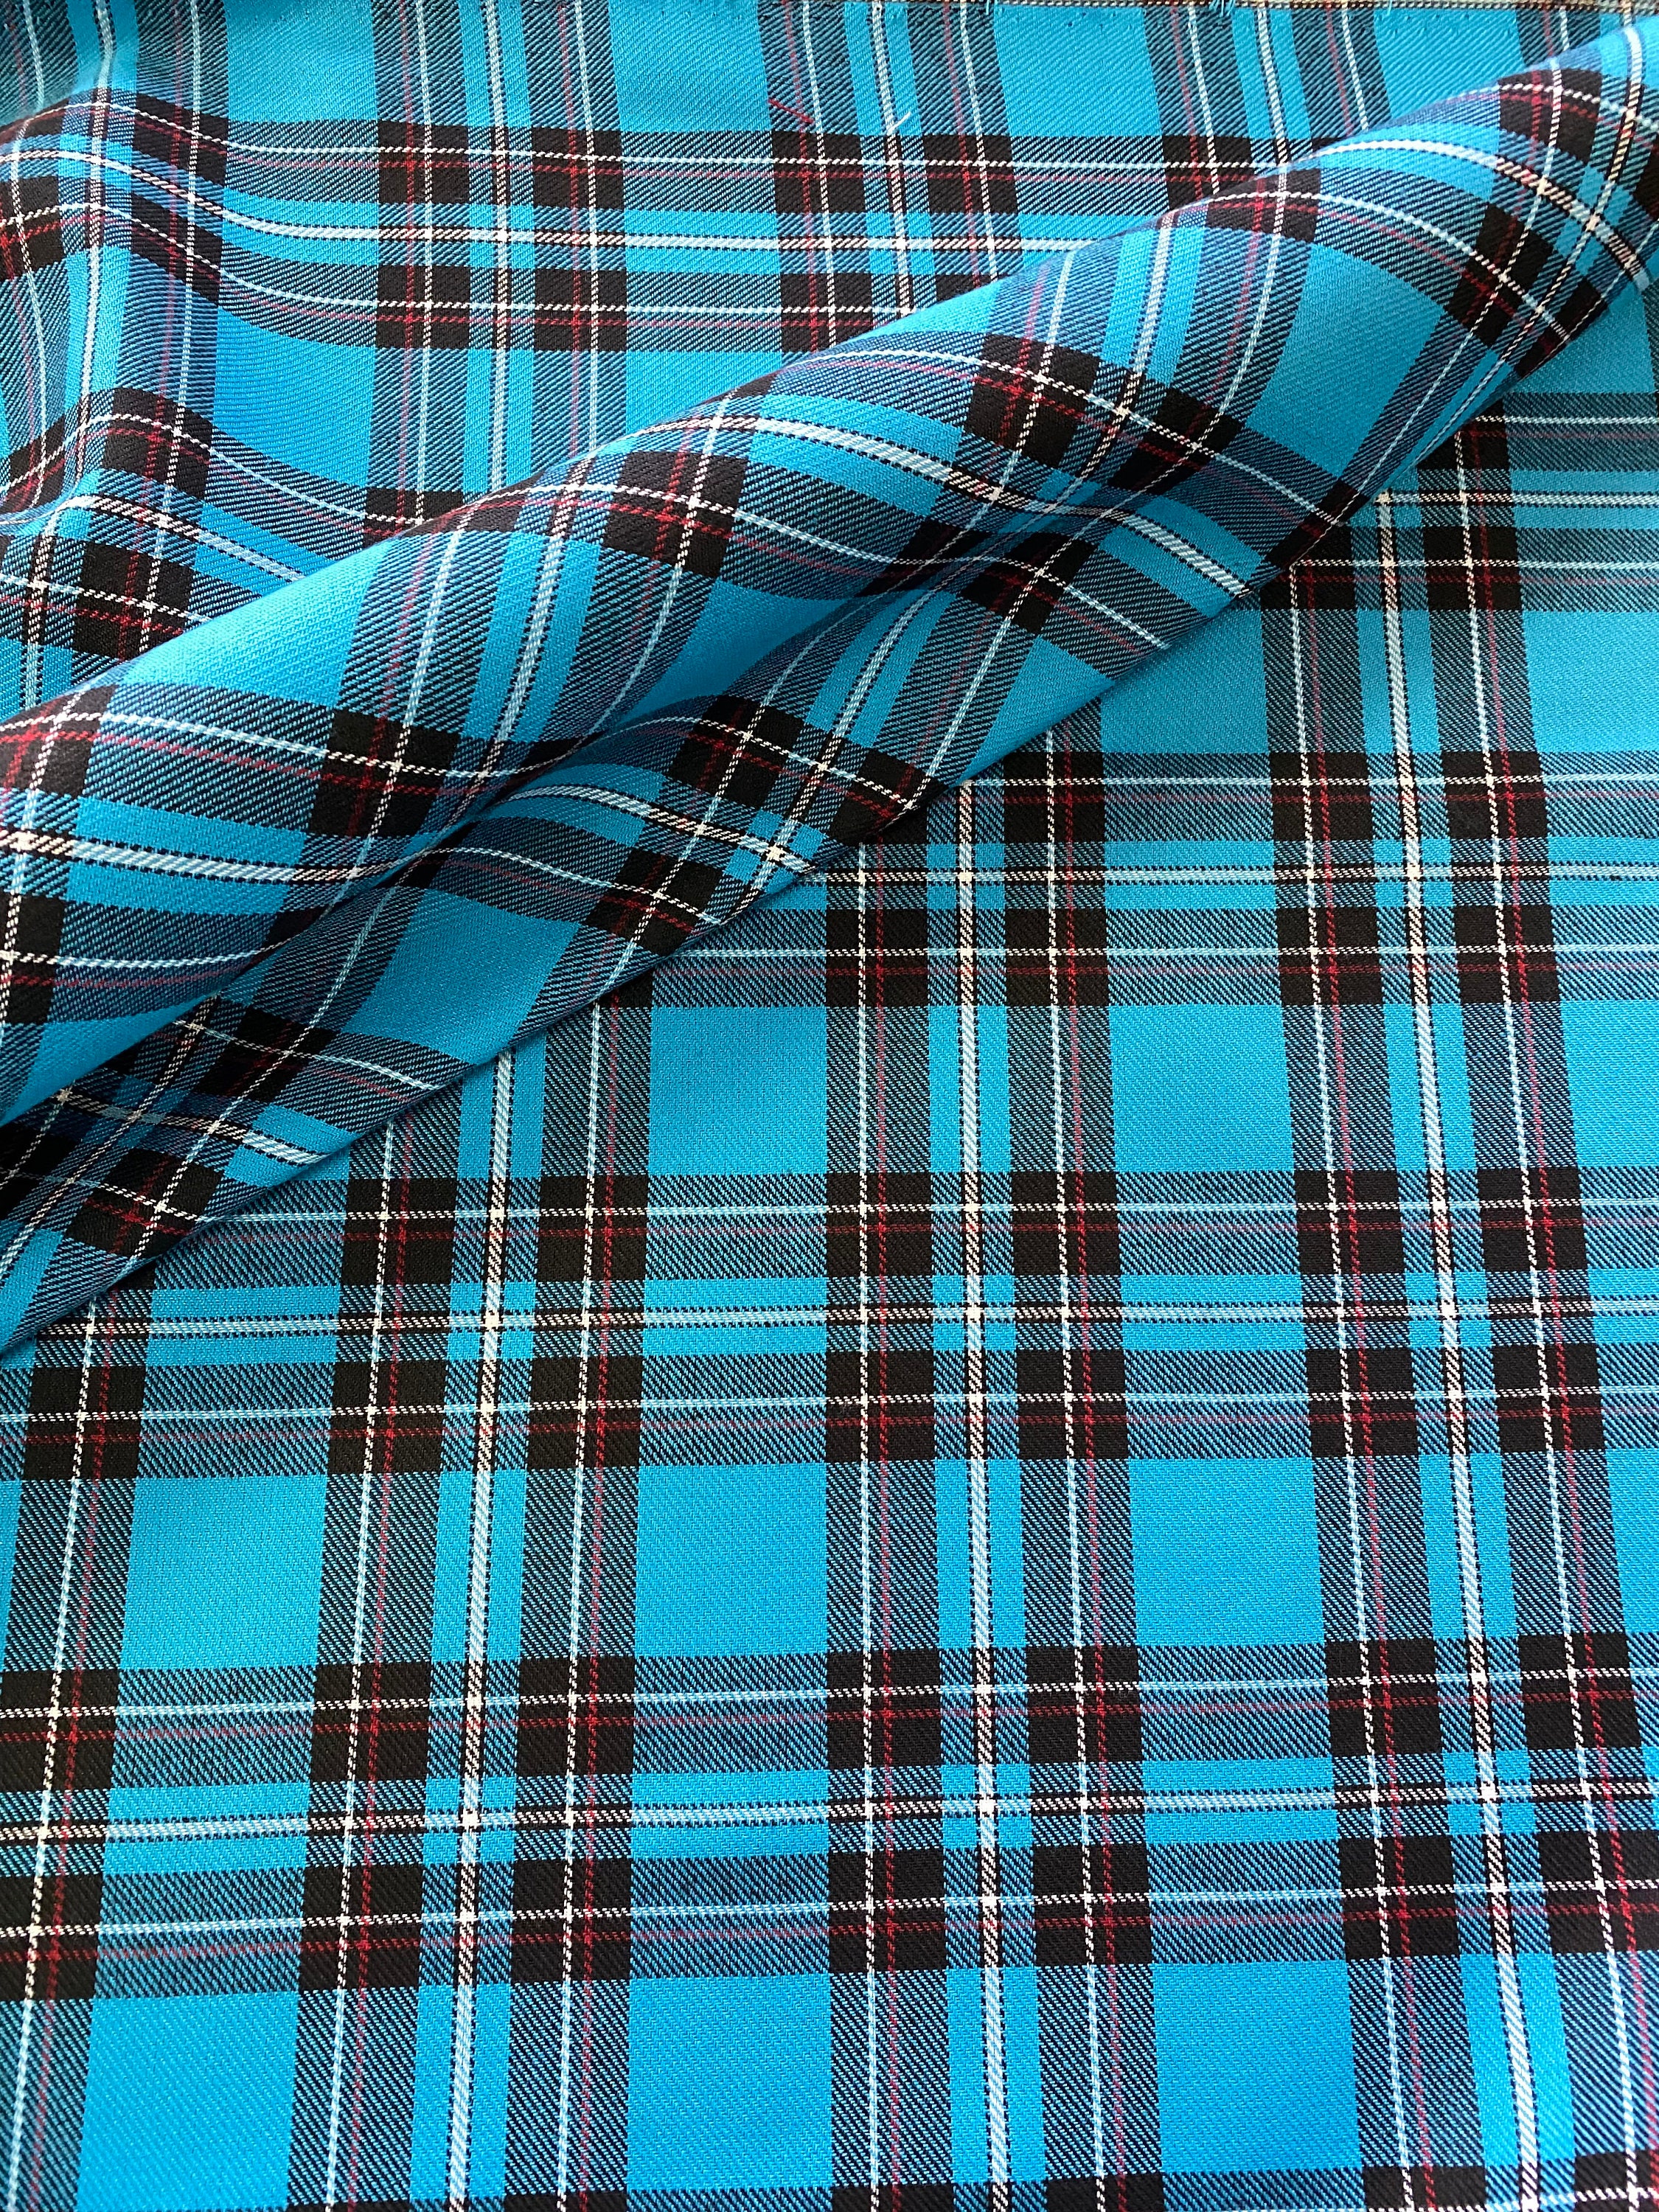 Ivory & Blue Plaid Cotton Flannel Fabric - 60 Wide - Sold by the Yard and  Bolt